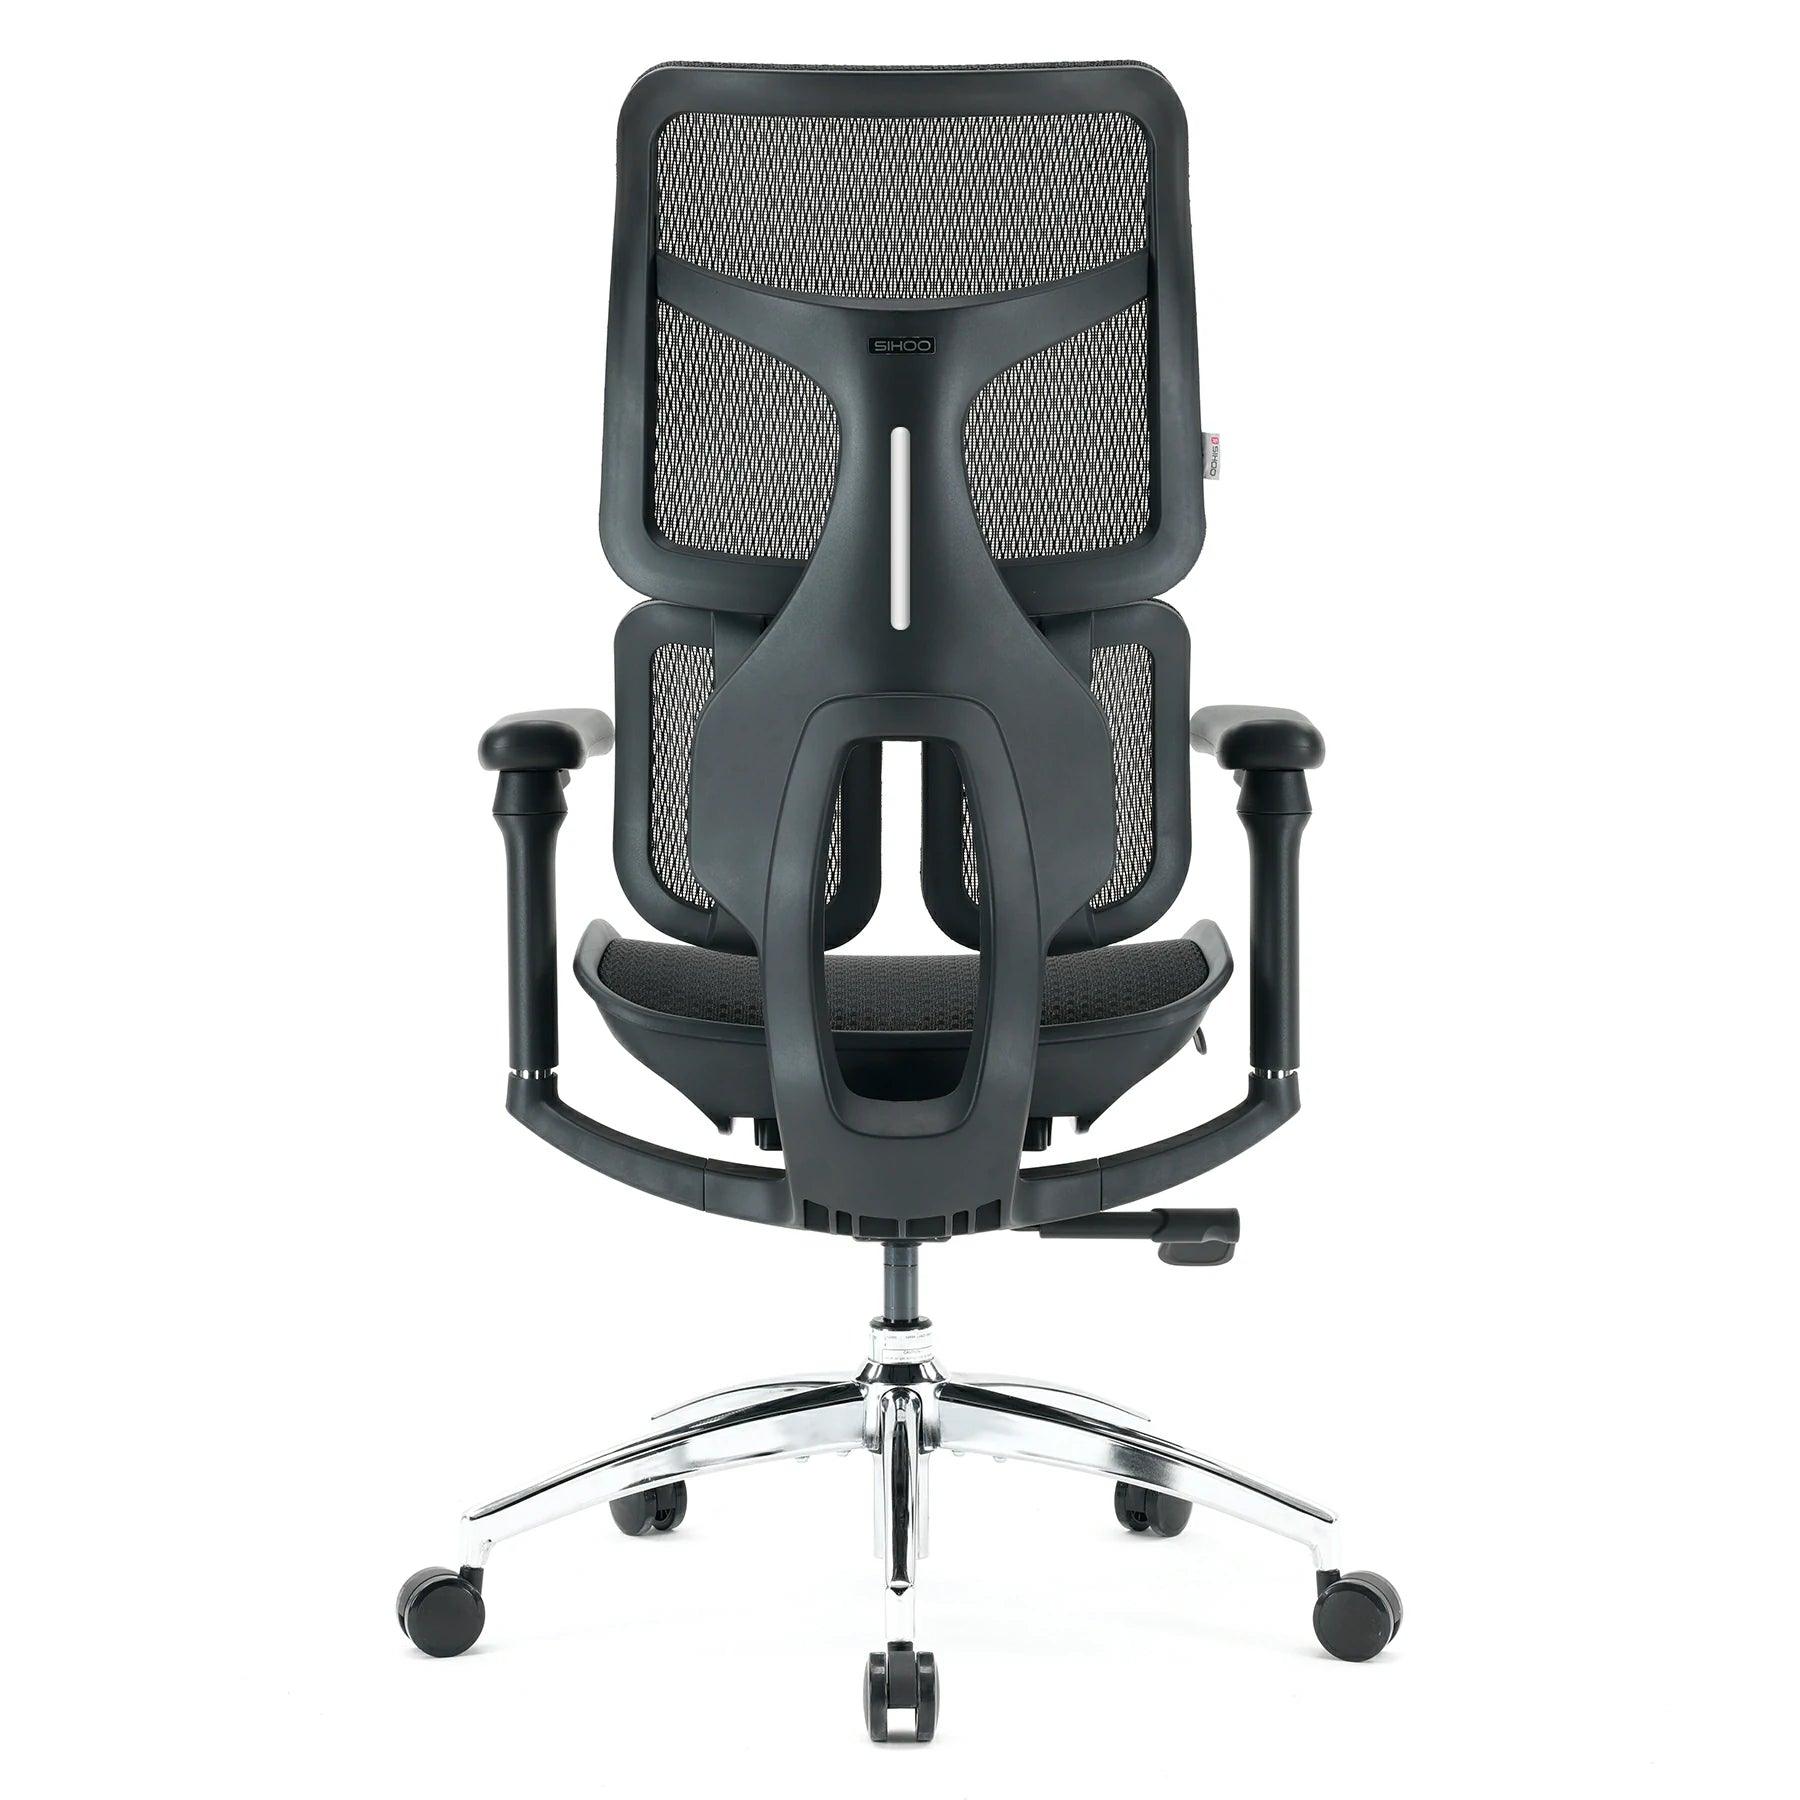 Sihoo Doro S100 Ergonomic Office Chair with Dual Dynamic Lumbar Support - Official US Sihoo Store